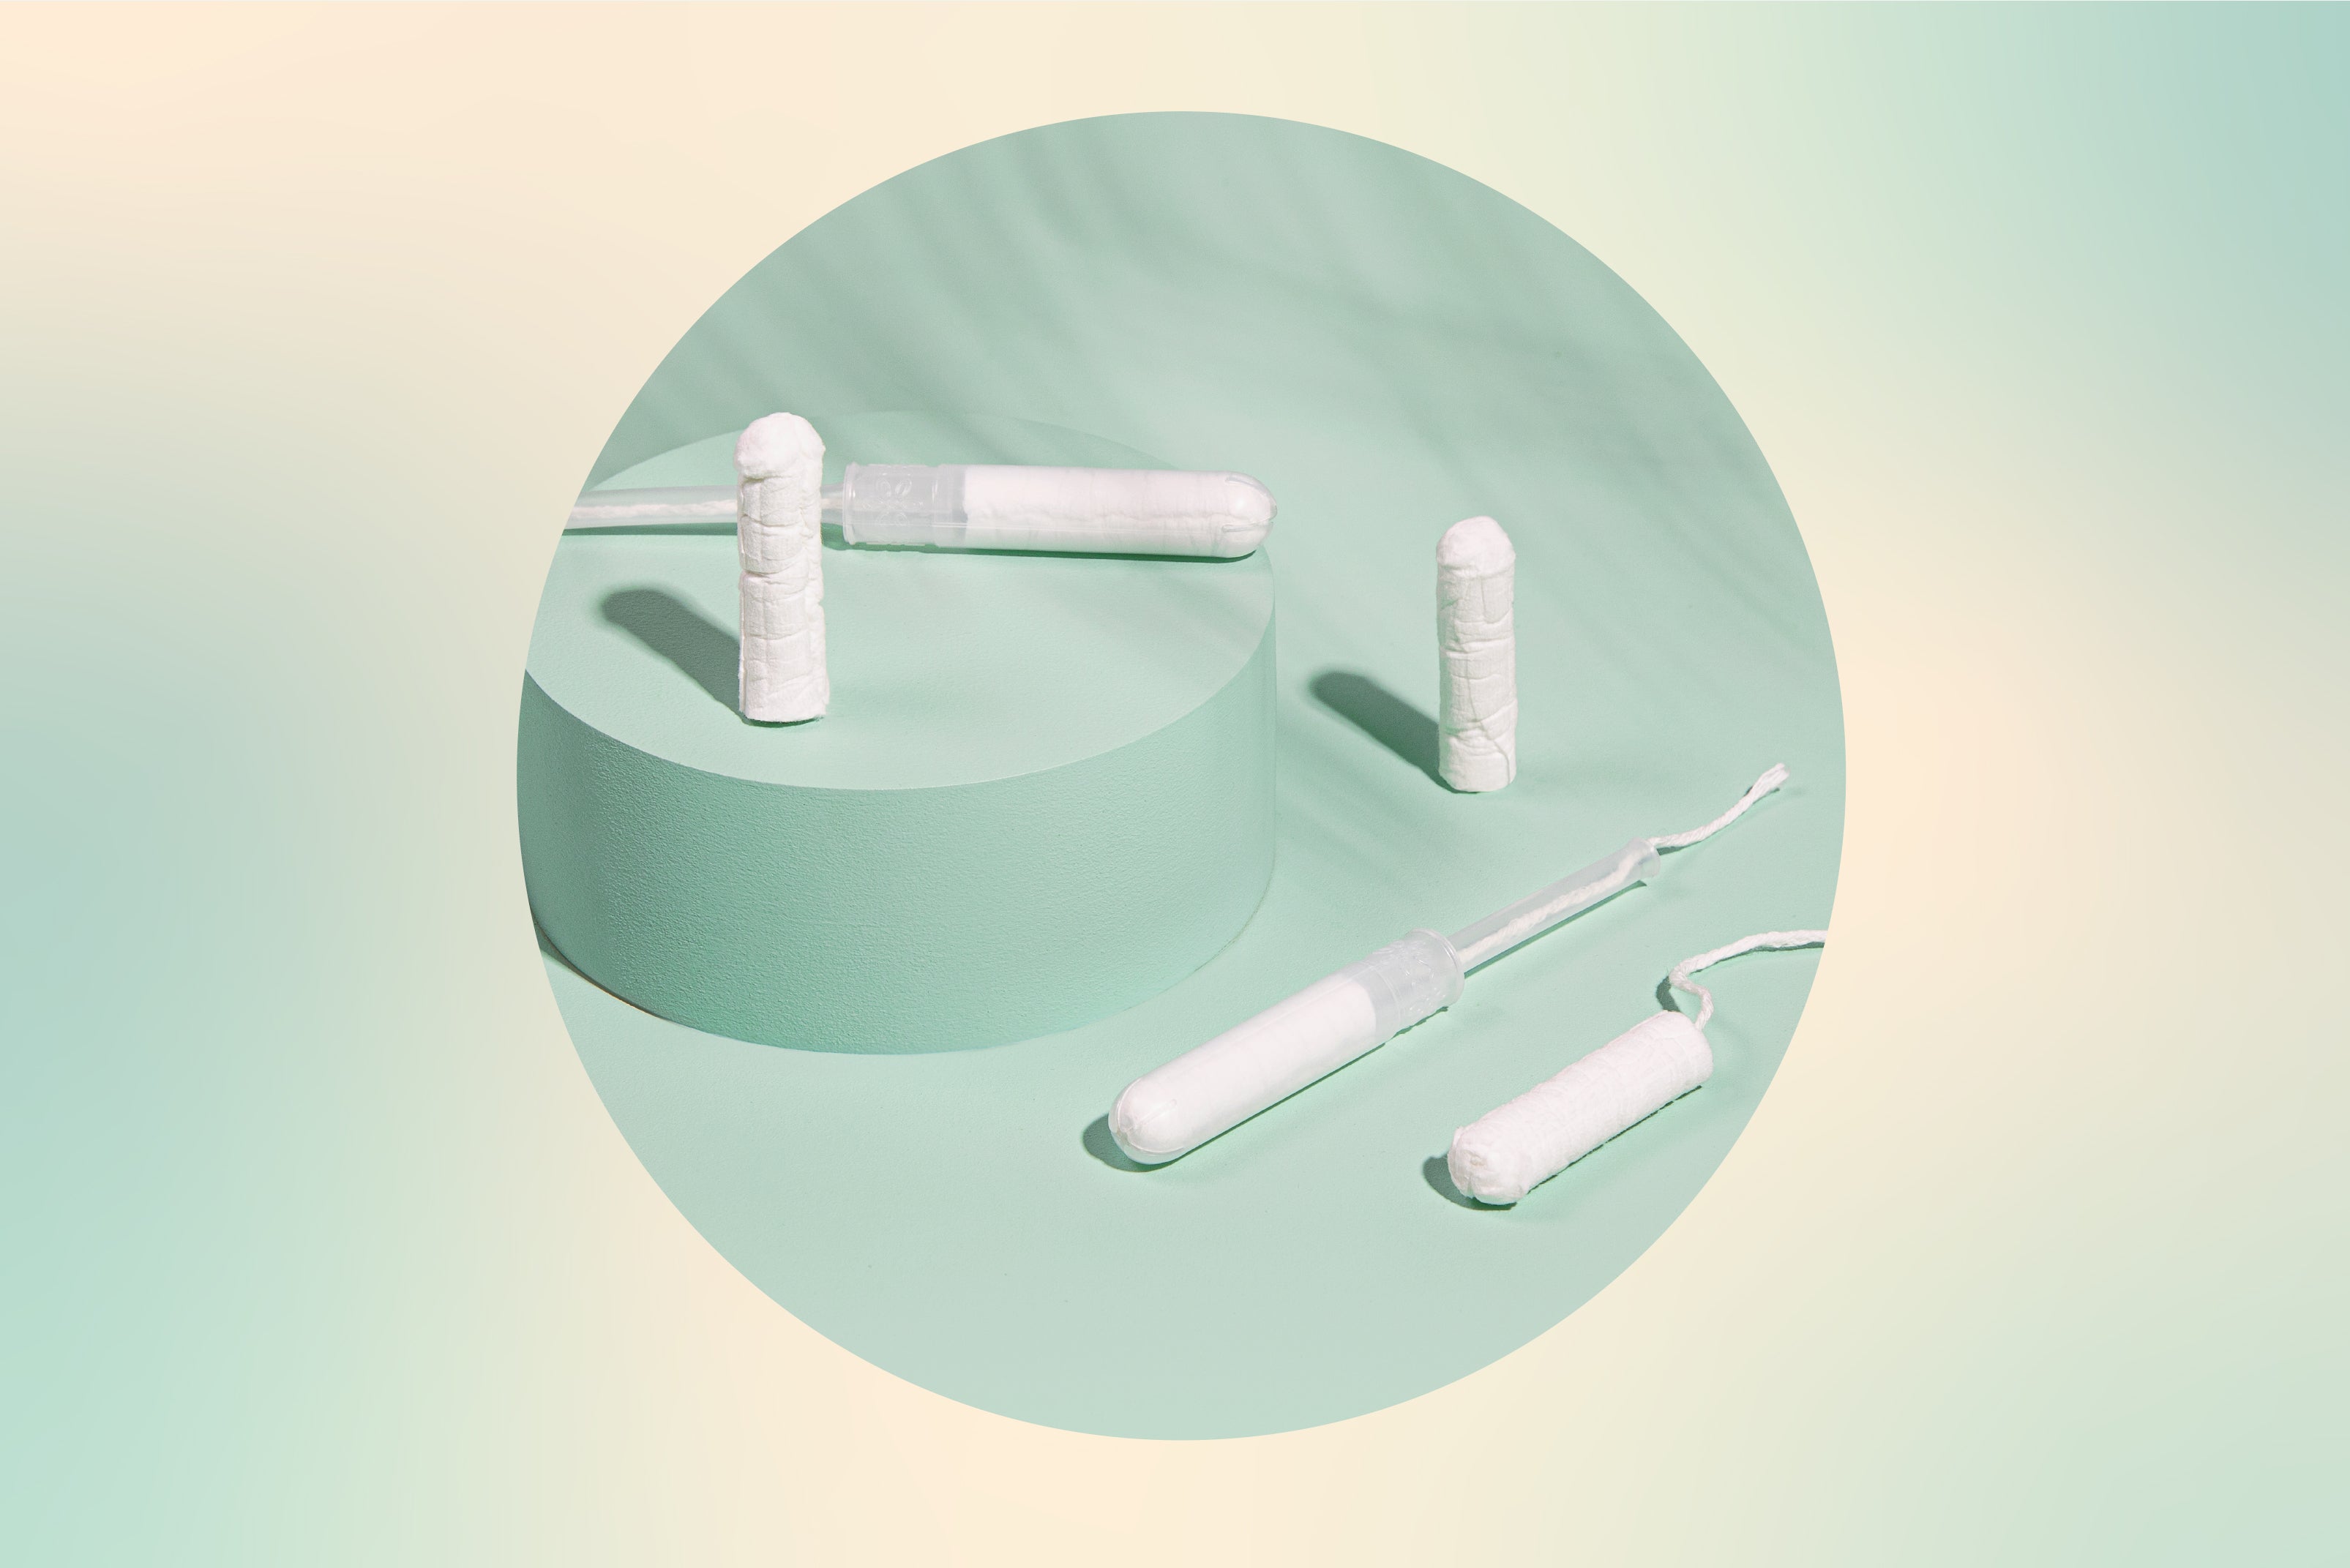 Circle crop image of some unused tampons sitting on a green surface.